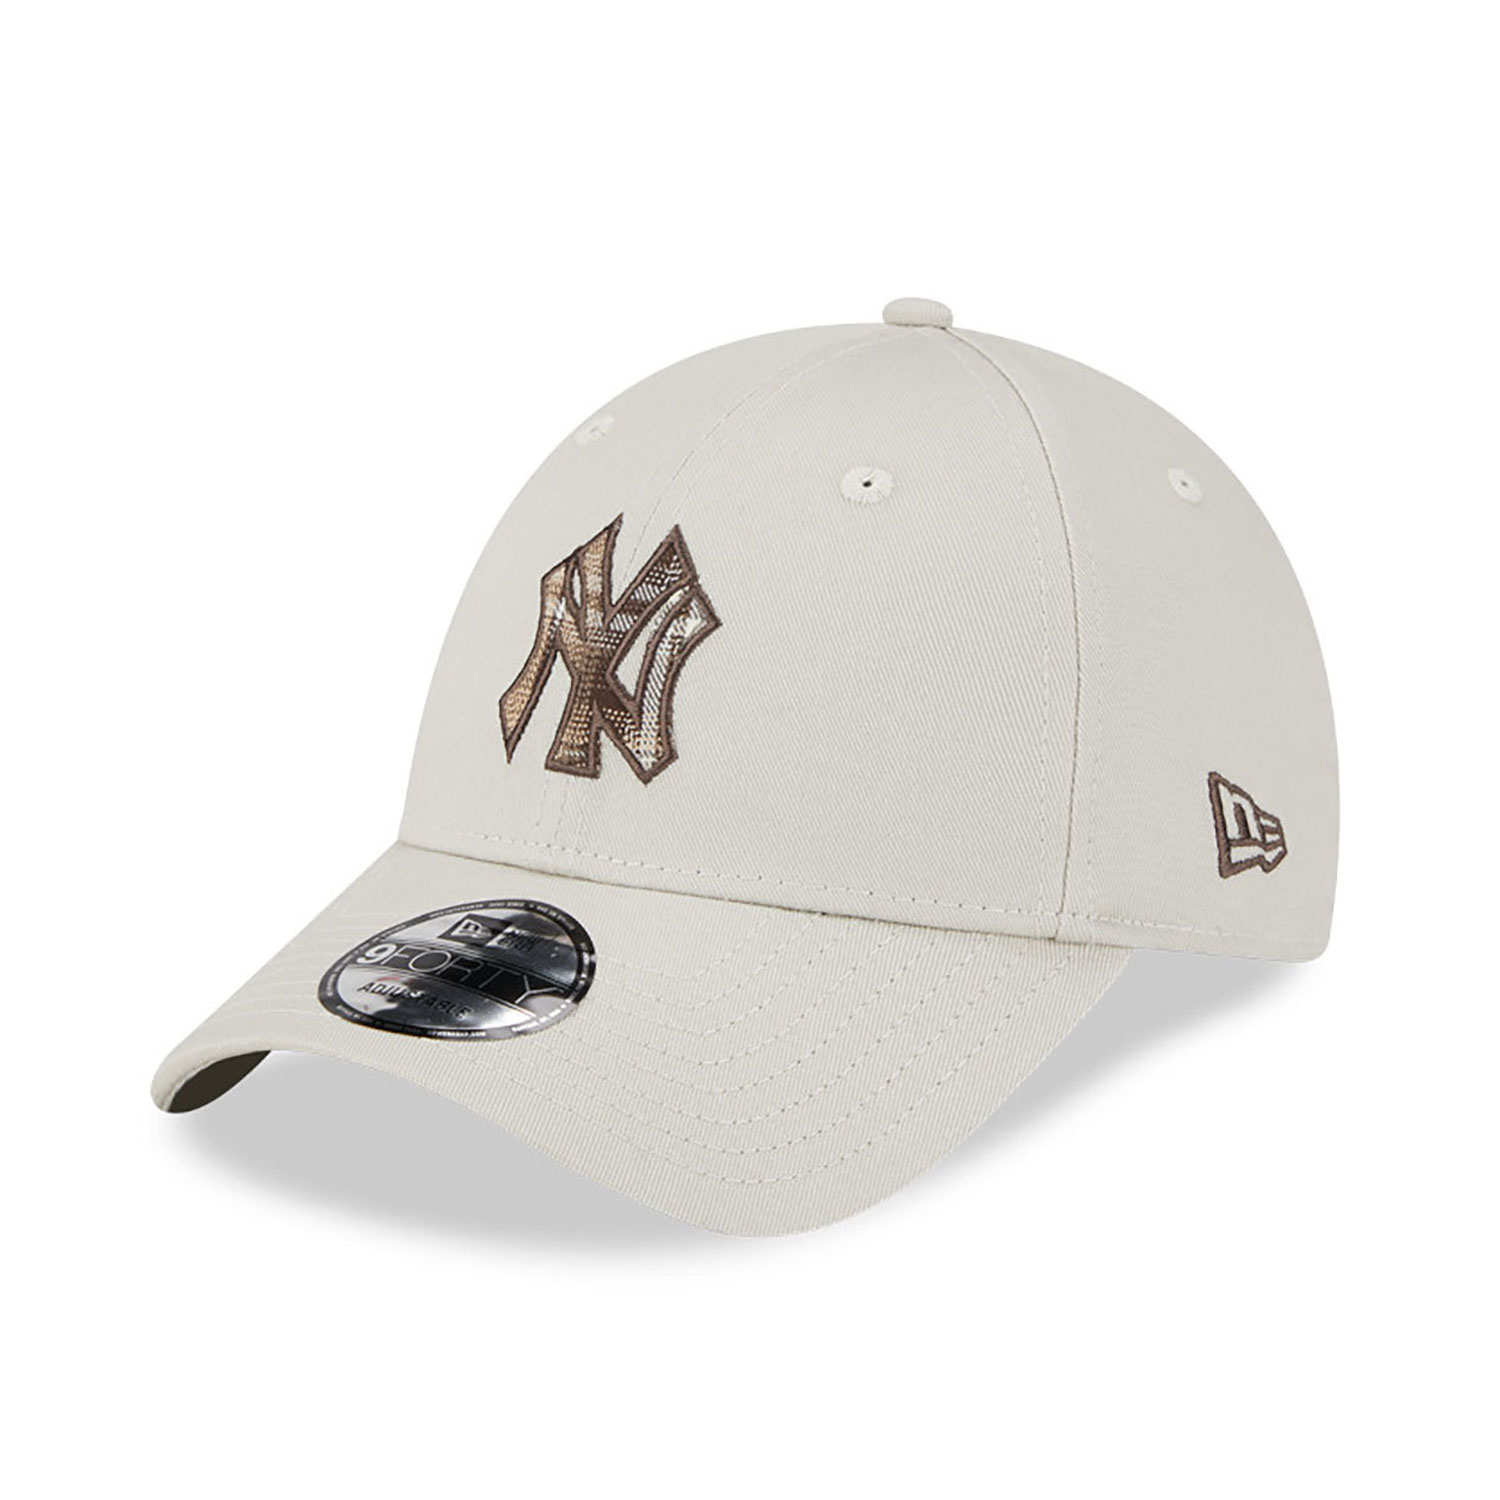 New York Yankees Check Infill Stone 9FORTY Adjustable Cap